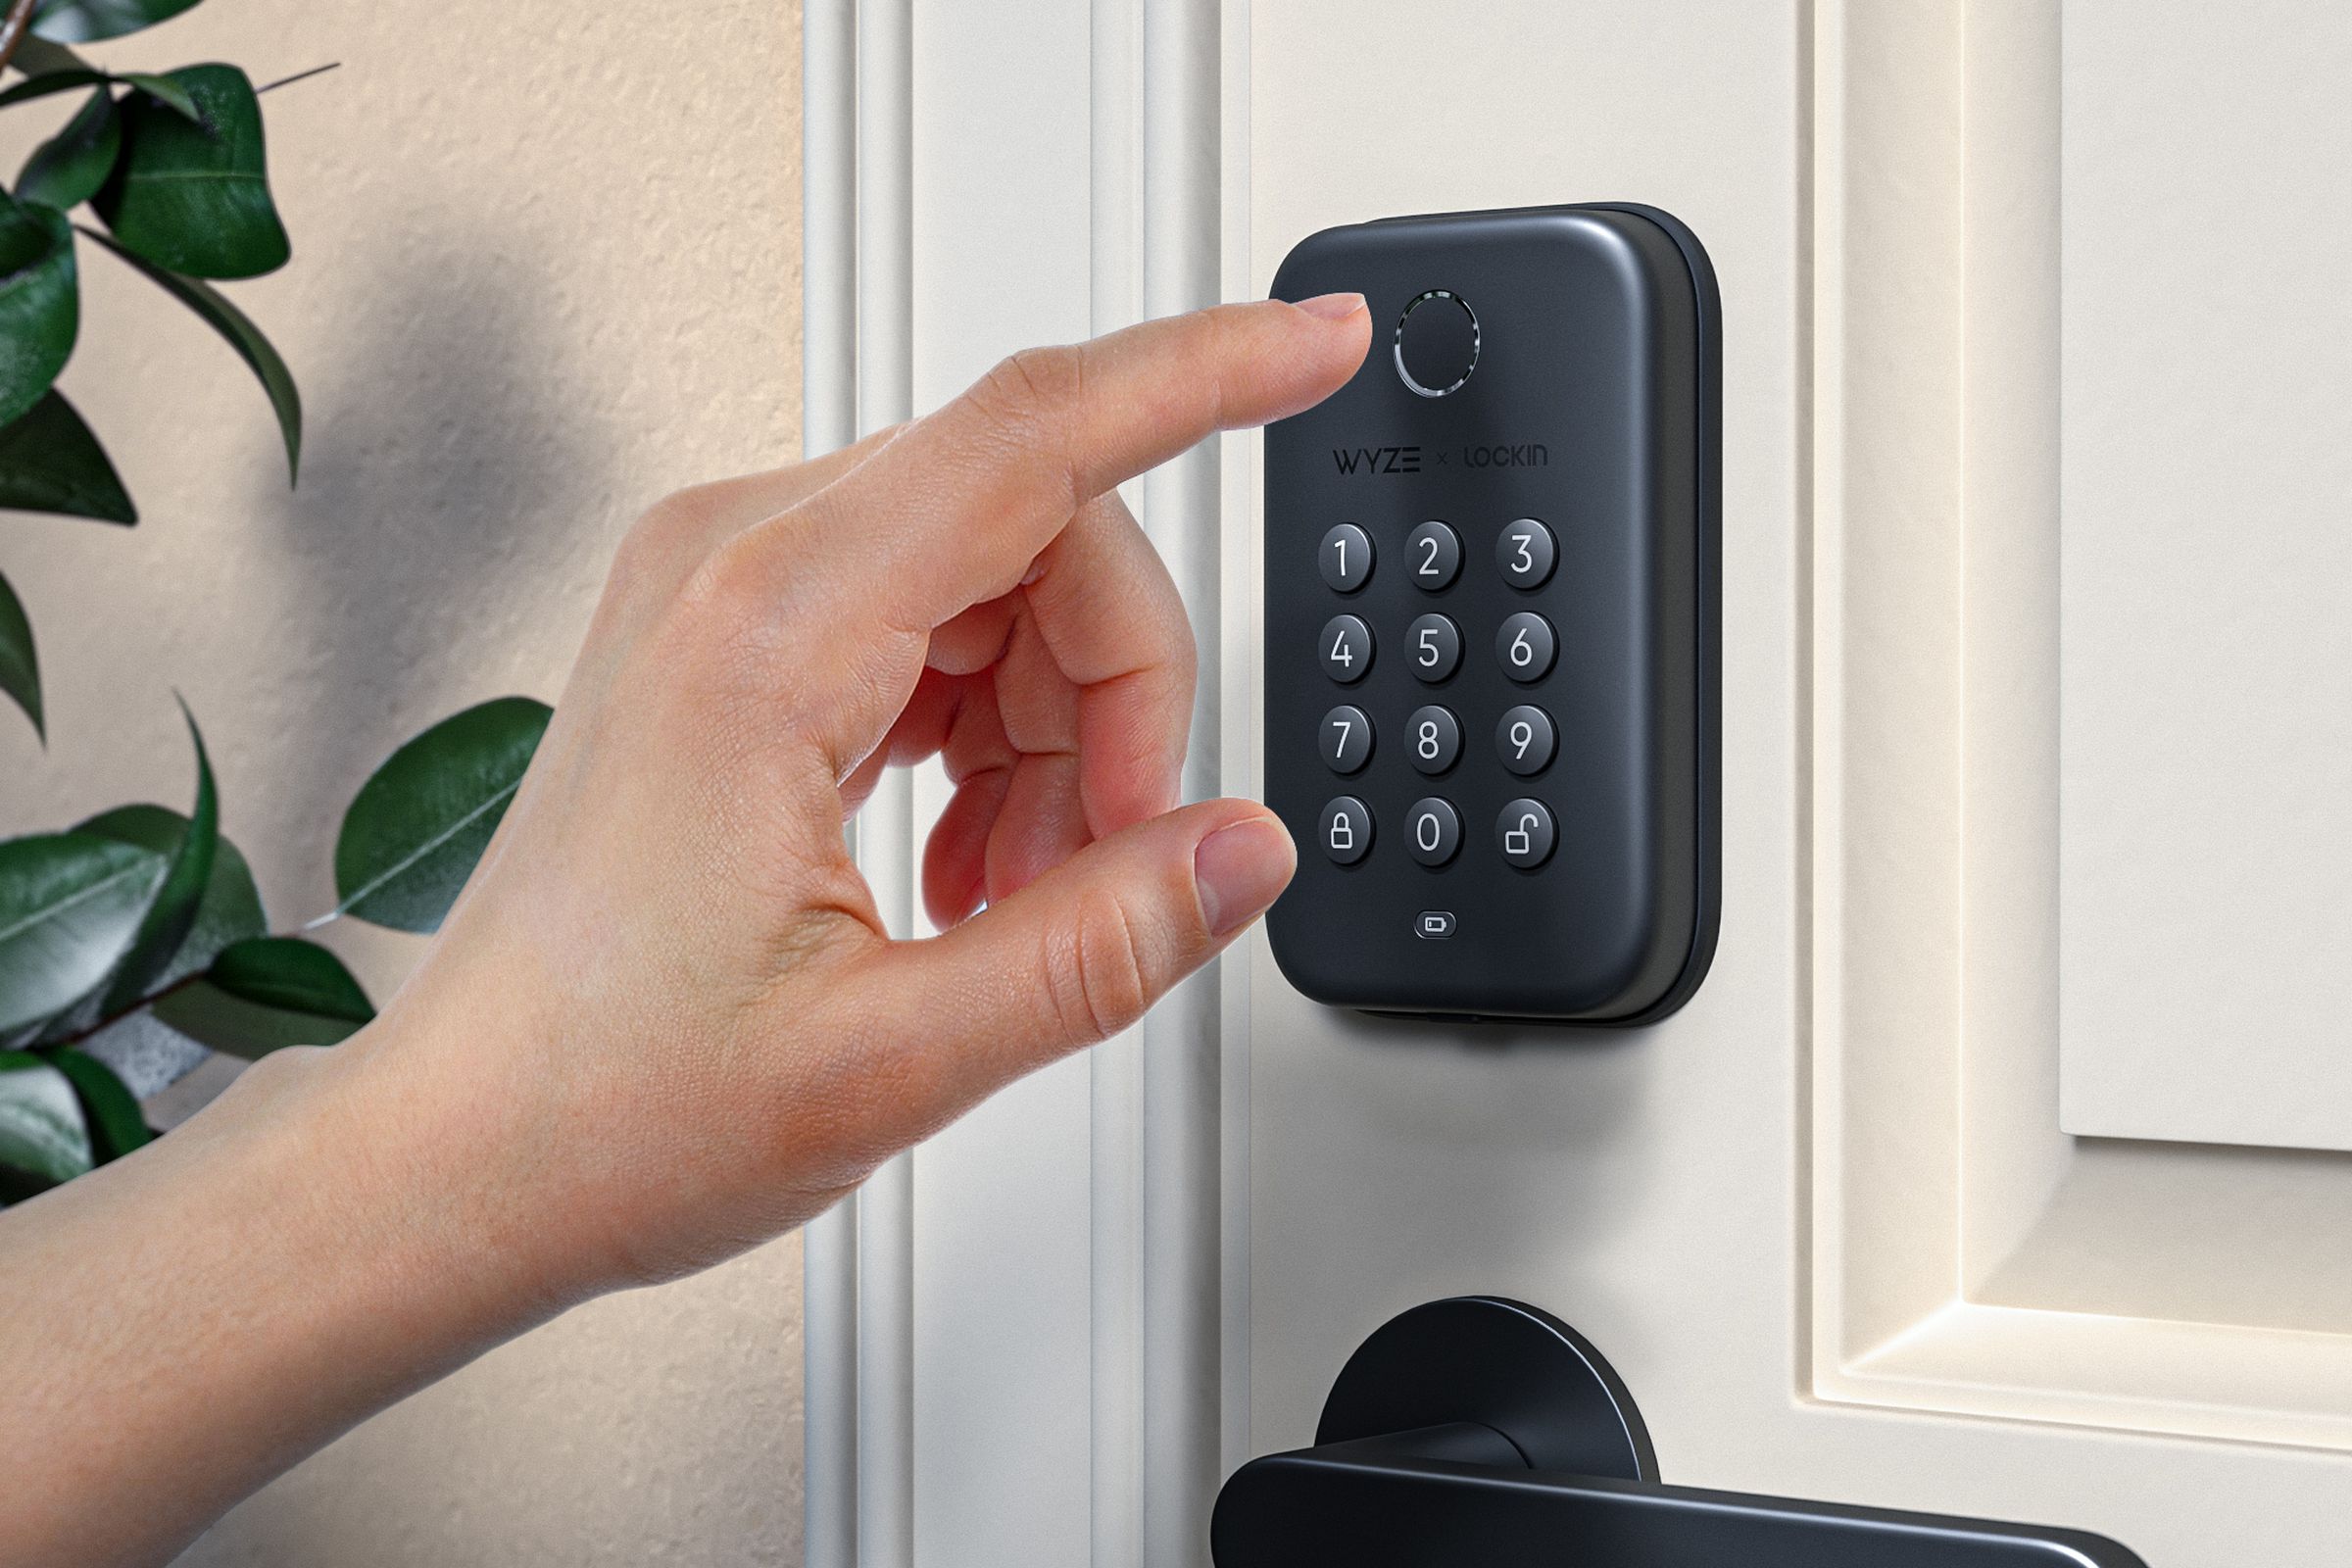 The Wyze Lock Bolt is a $70 smart lock with fingerprint and keypad access.